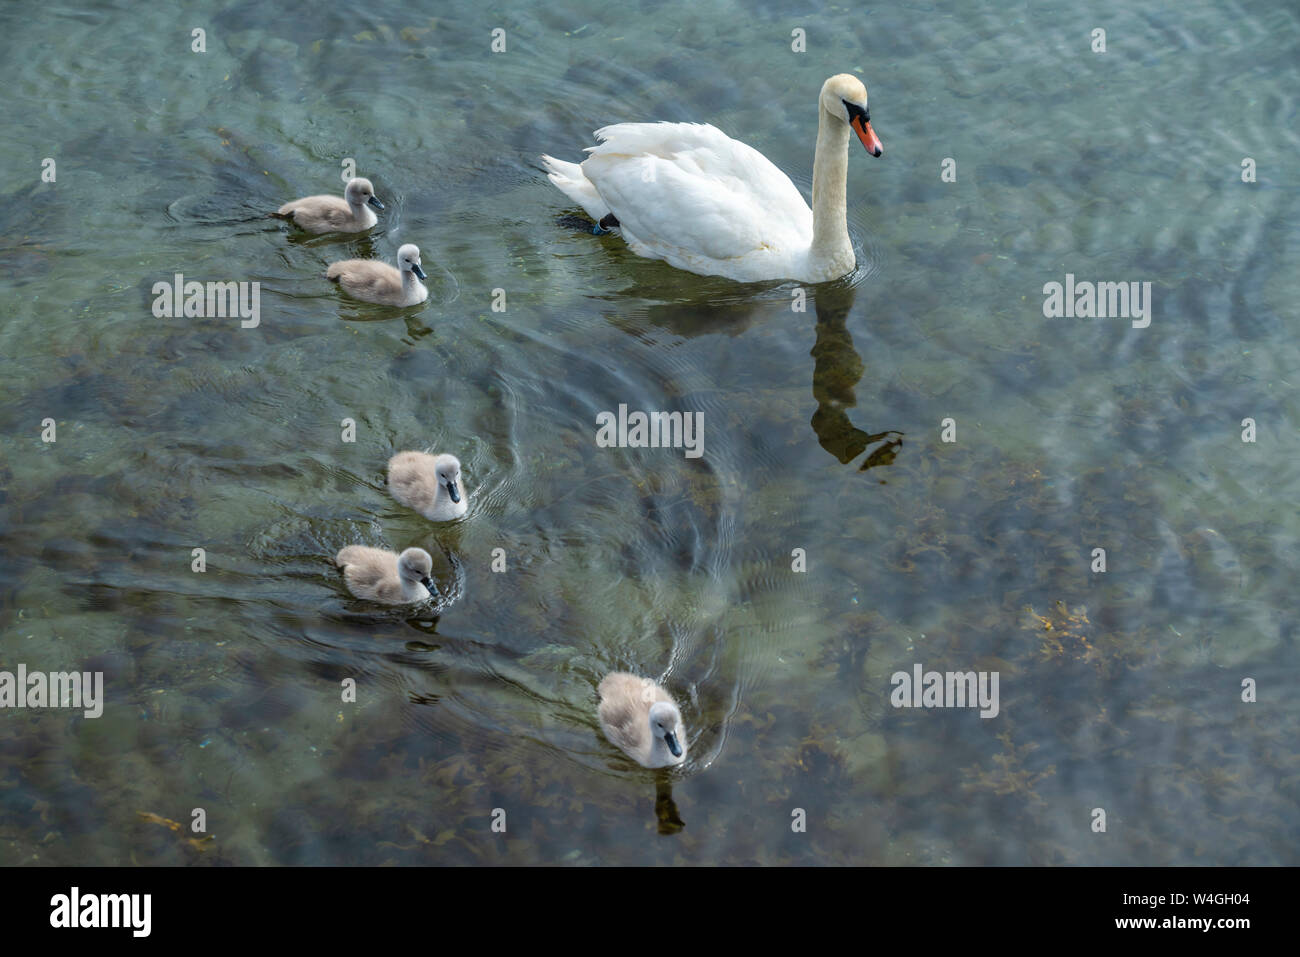 Swan with chicks swimming in water Stock Photo